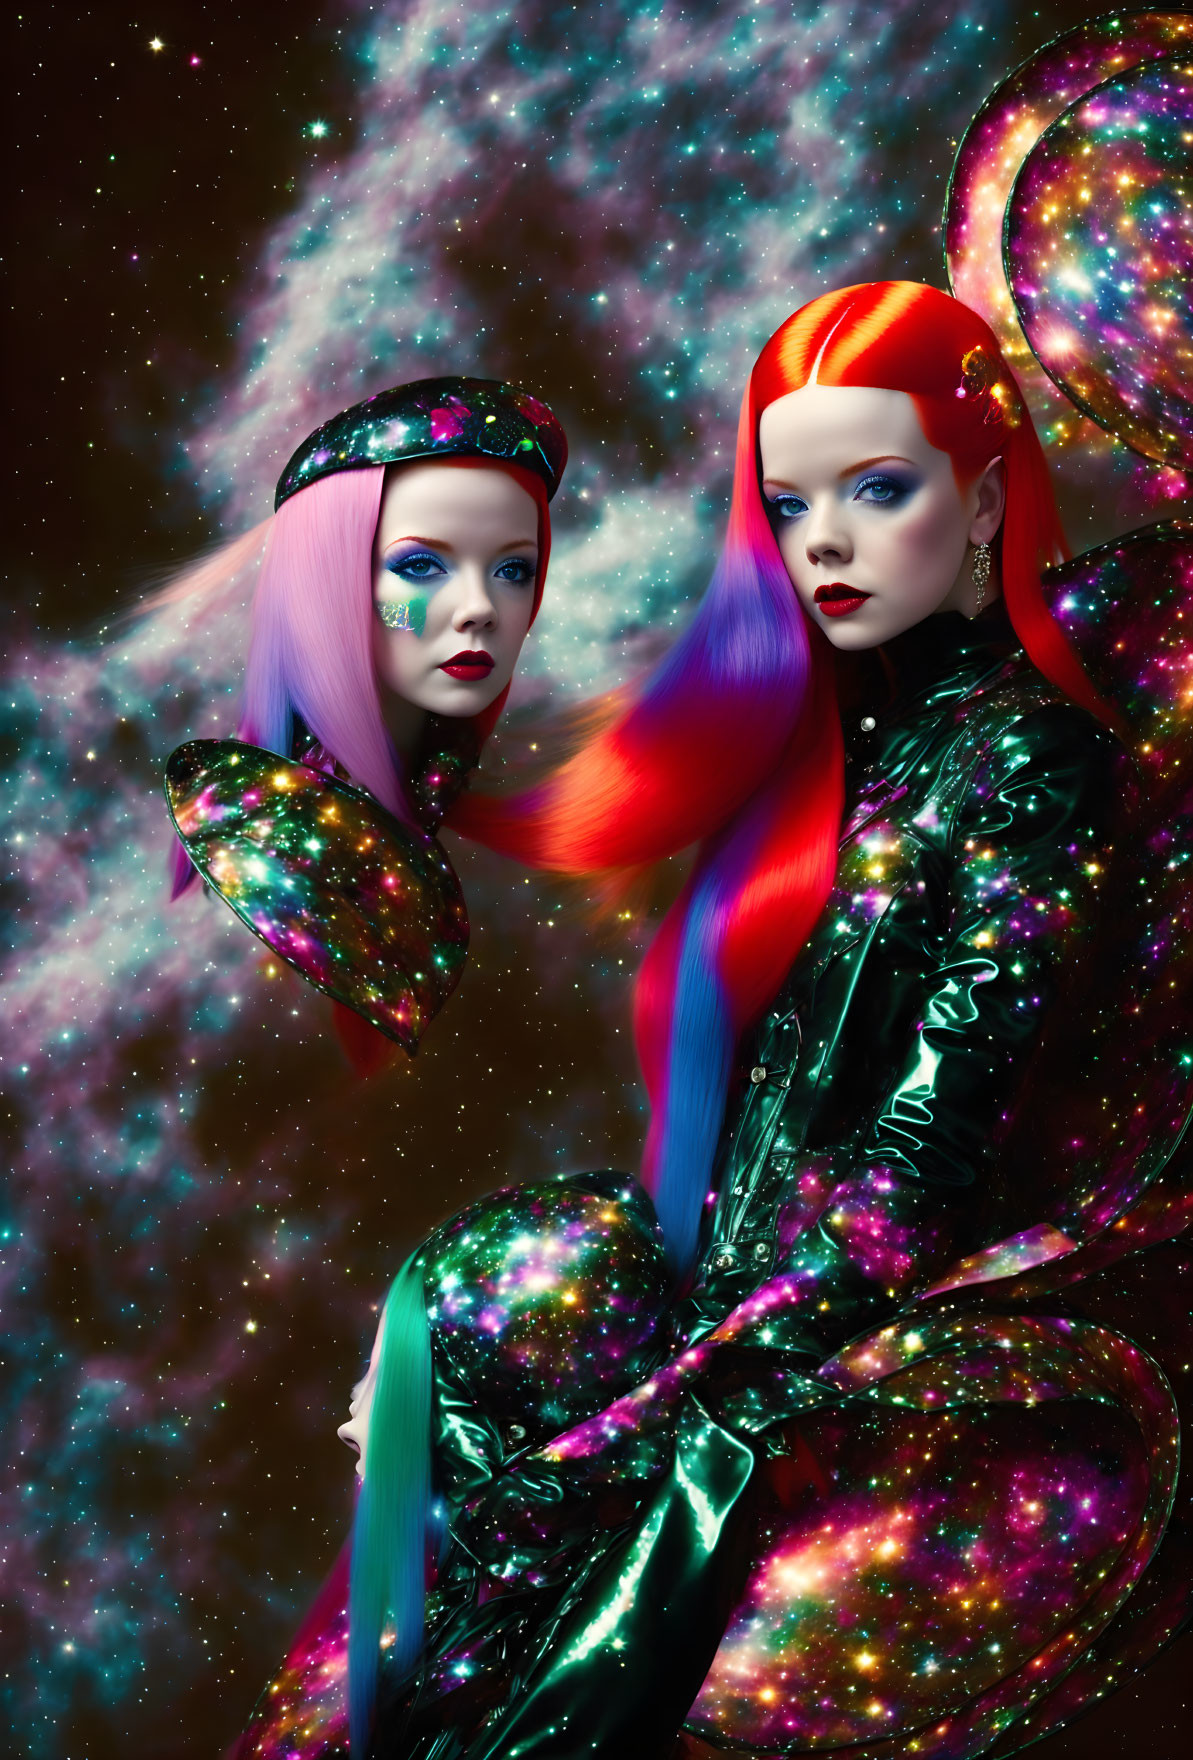 Two women with vibrant, multicolored hair and cosmic-themed makeup in shiny metallic outfits against a star